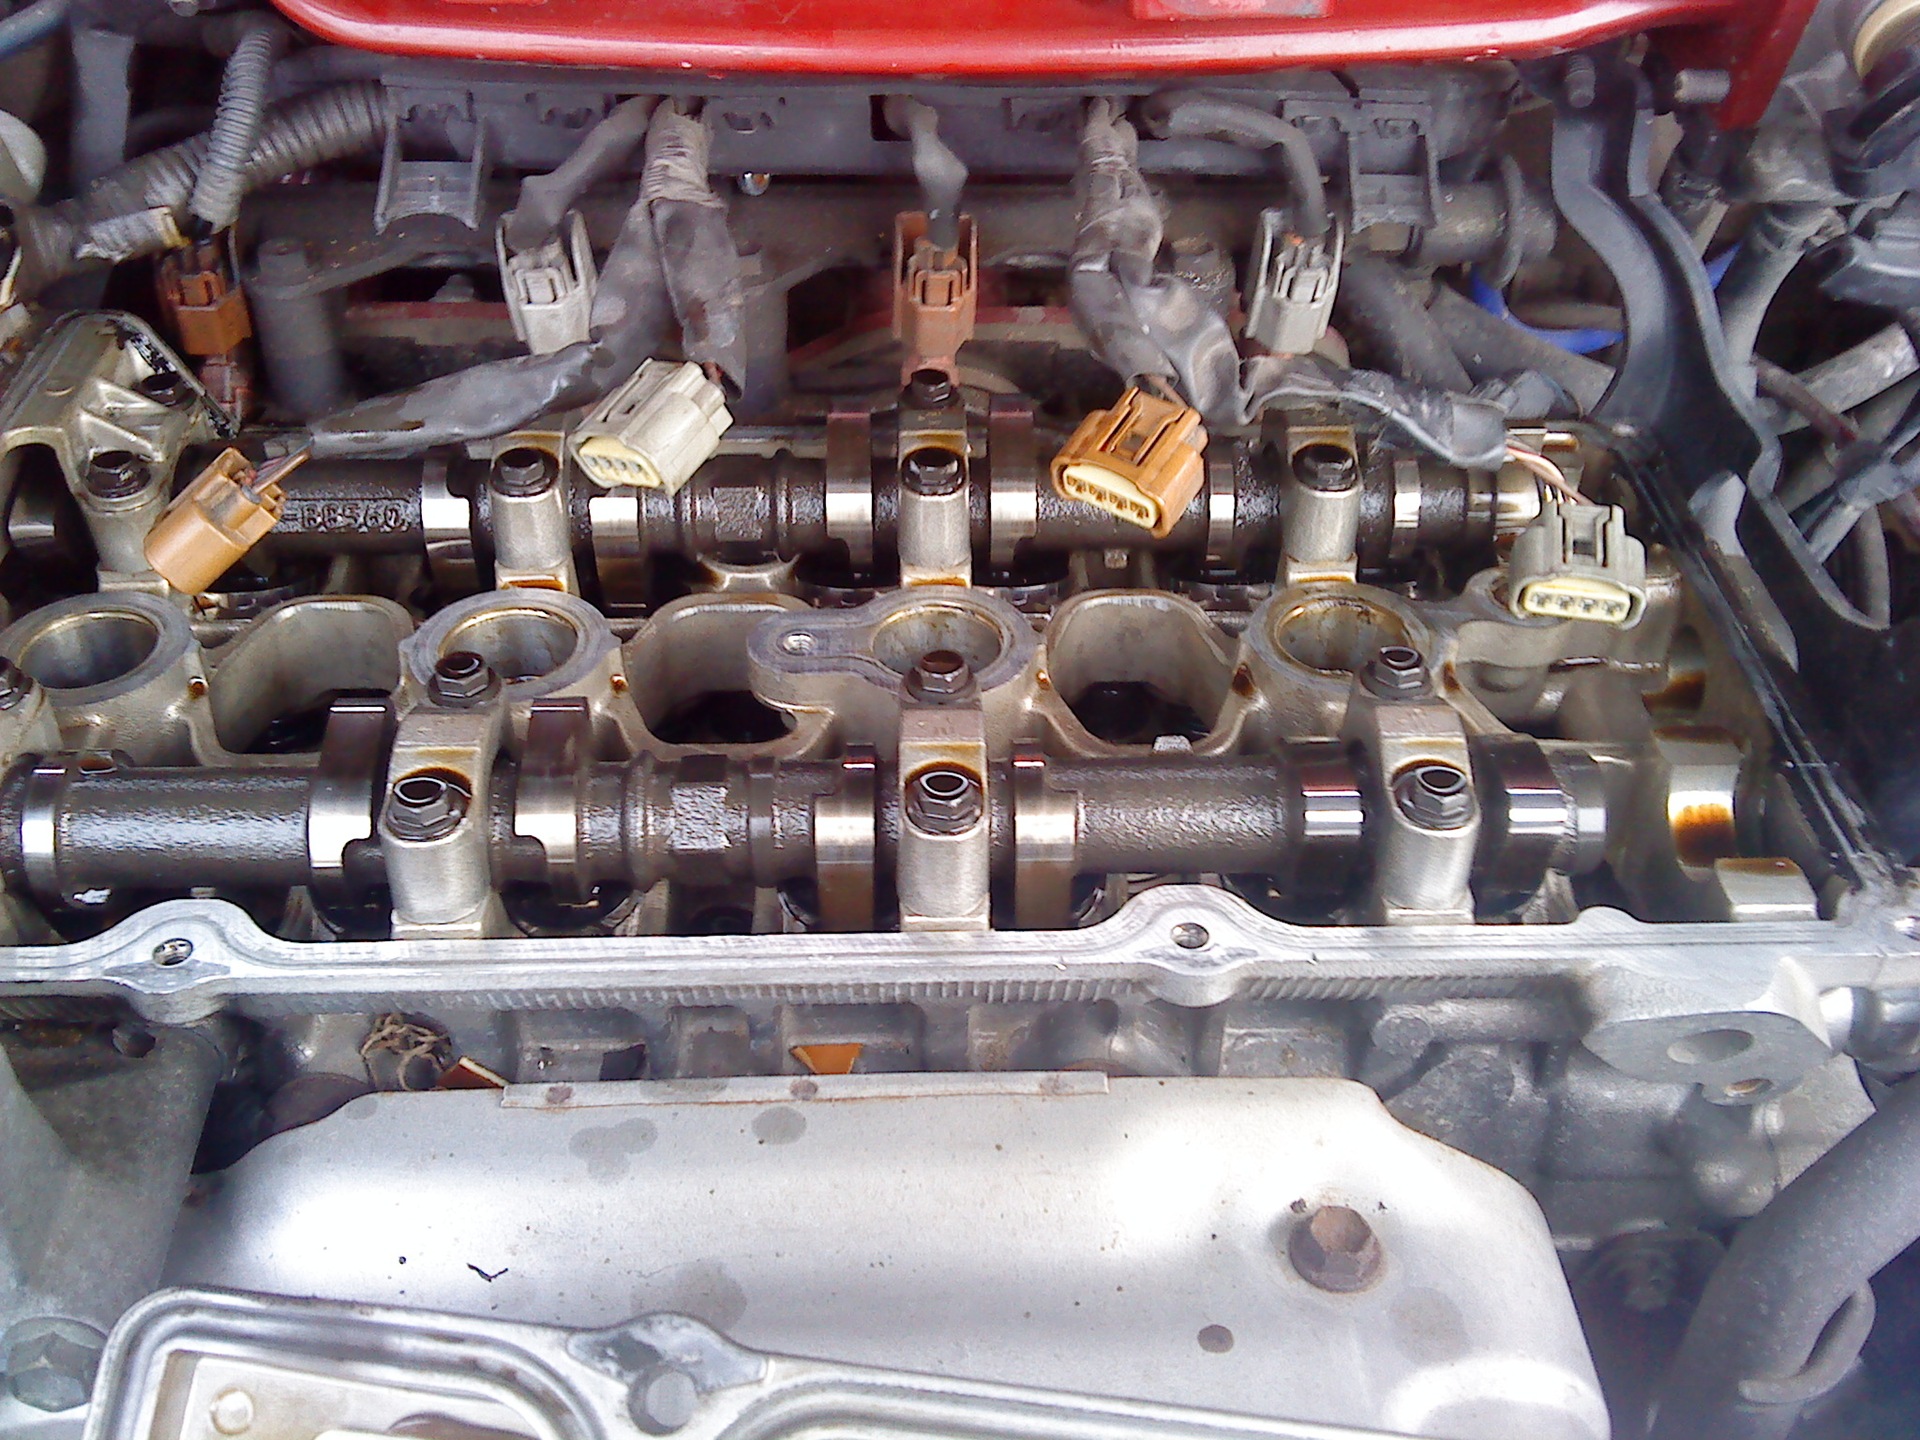 Replacing the cylinder head cover gasket - Toyota Celica 20L 1995